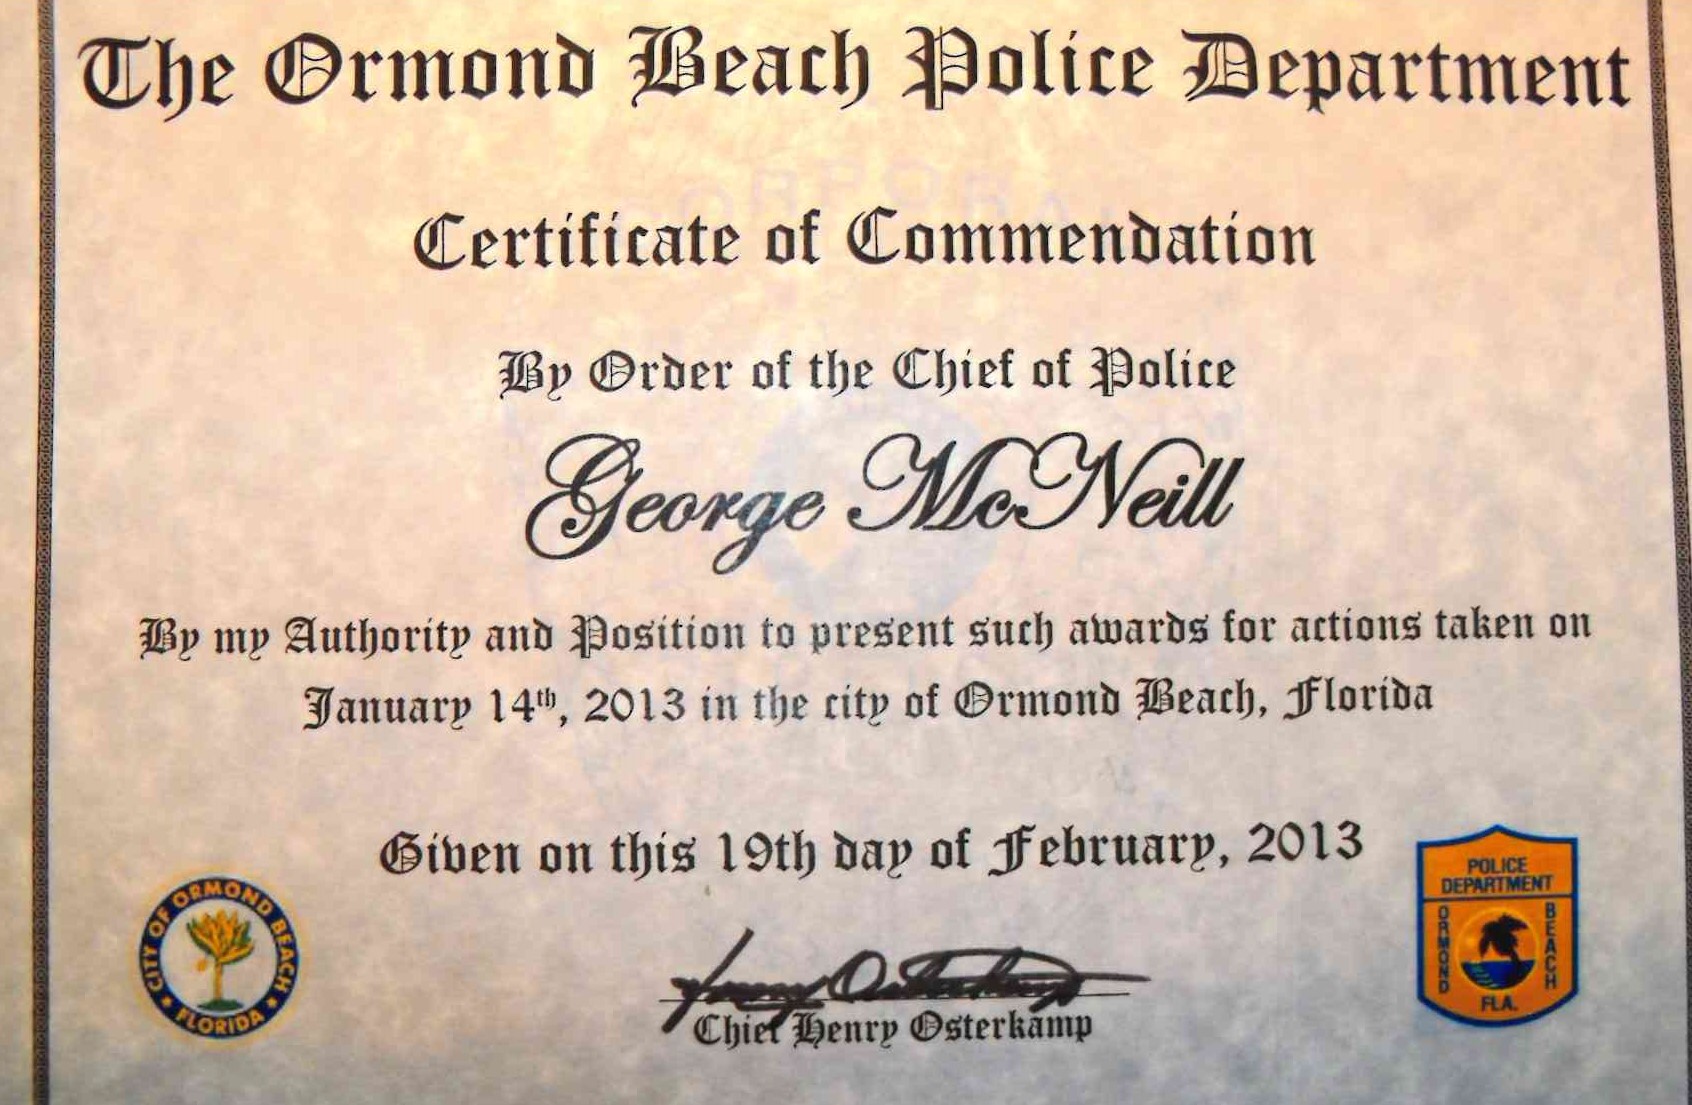 Certificate of Commendation Ormond Beach Police Department